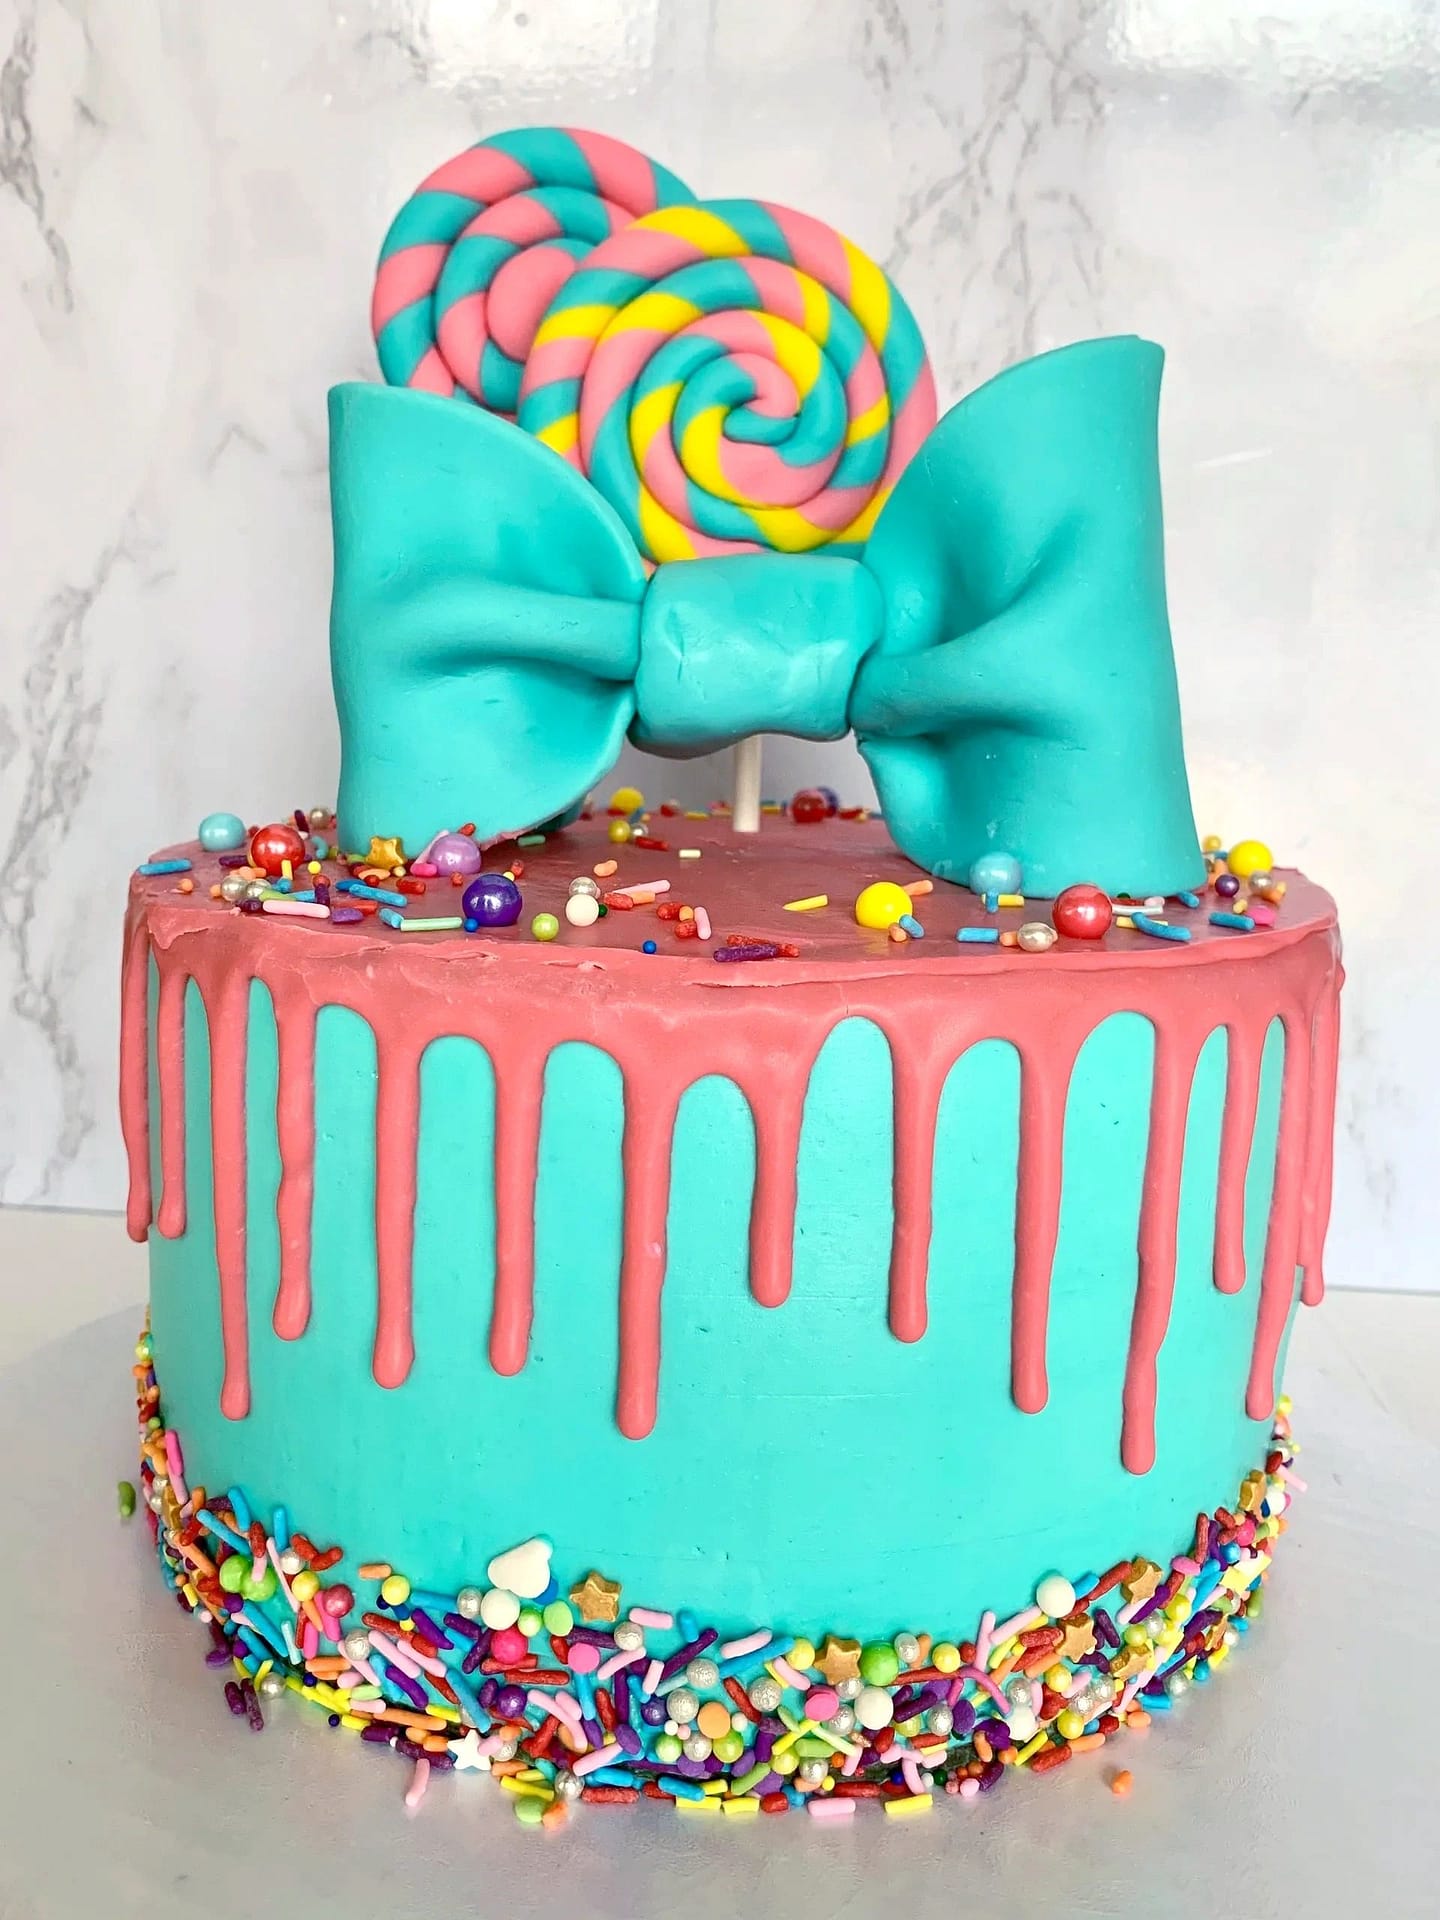 Turquoise Bow Candy Birthday Cake with Rainbow Sprinkles.